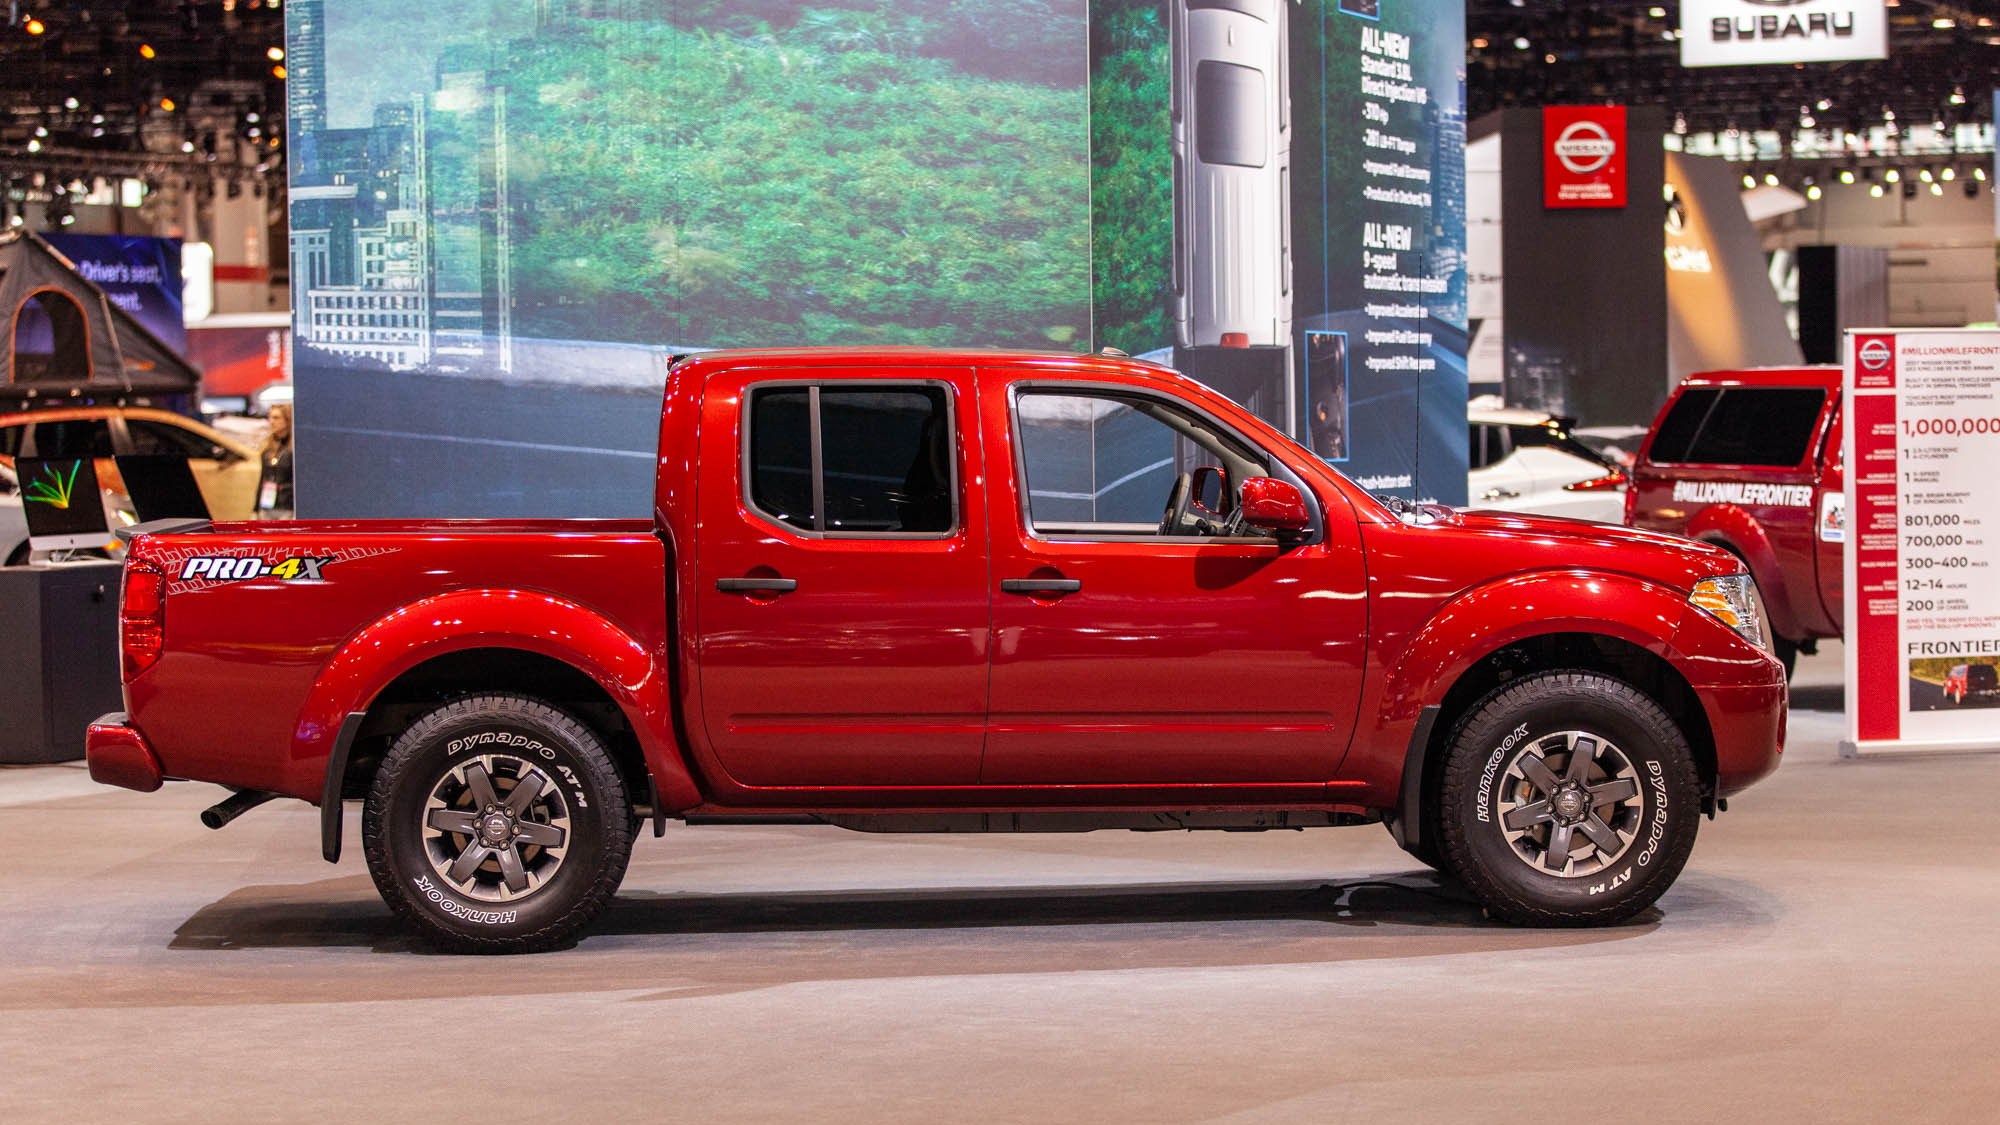 2020 Nissan Frontier, 2020 Chicago Auto Show